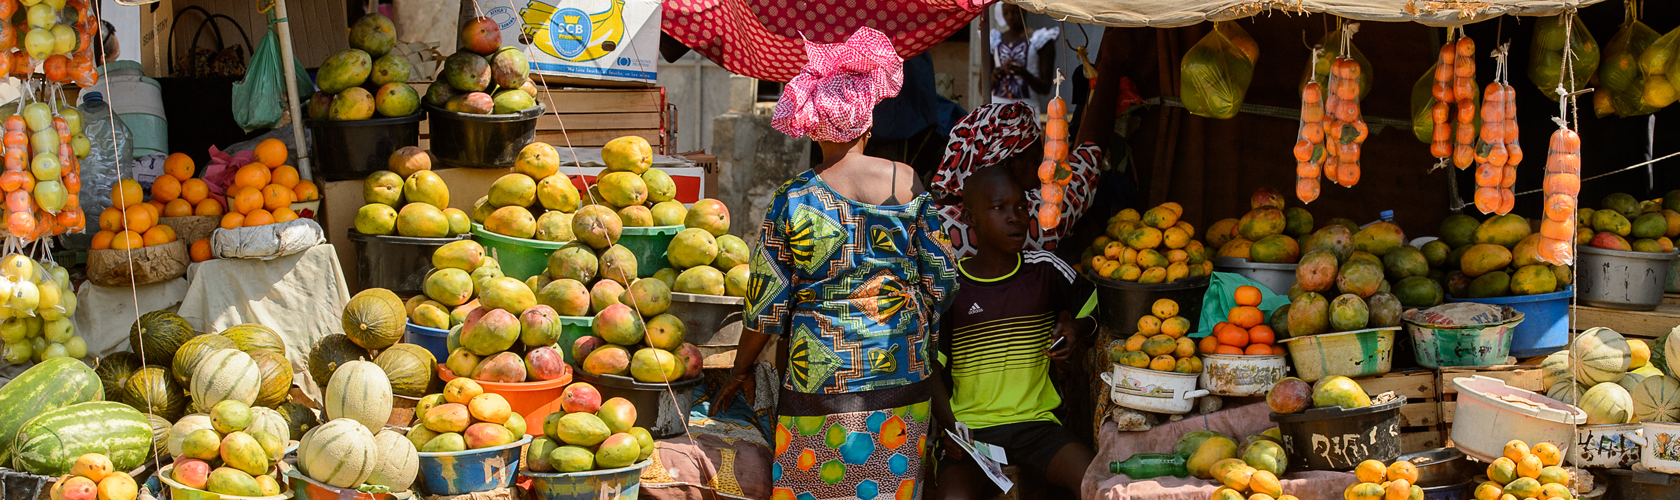 Zero Hunger: Africa's Private Sector Driving Innovation and Growth